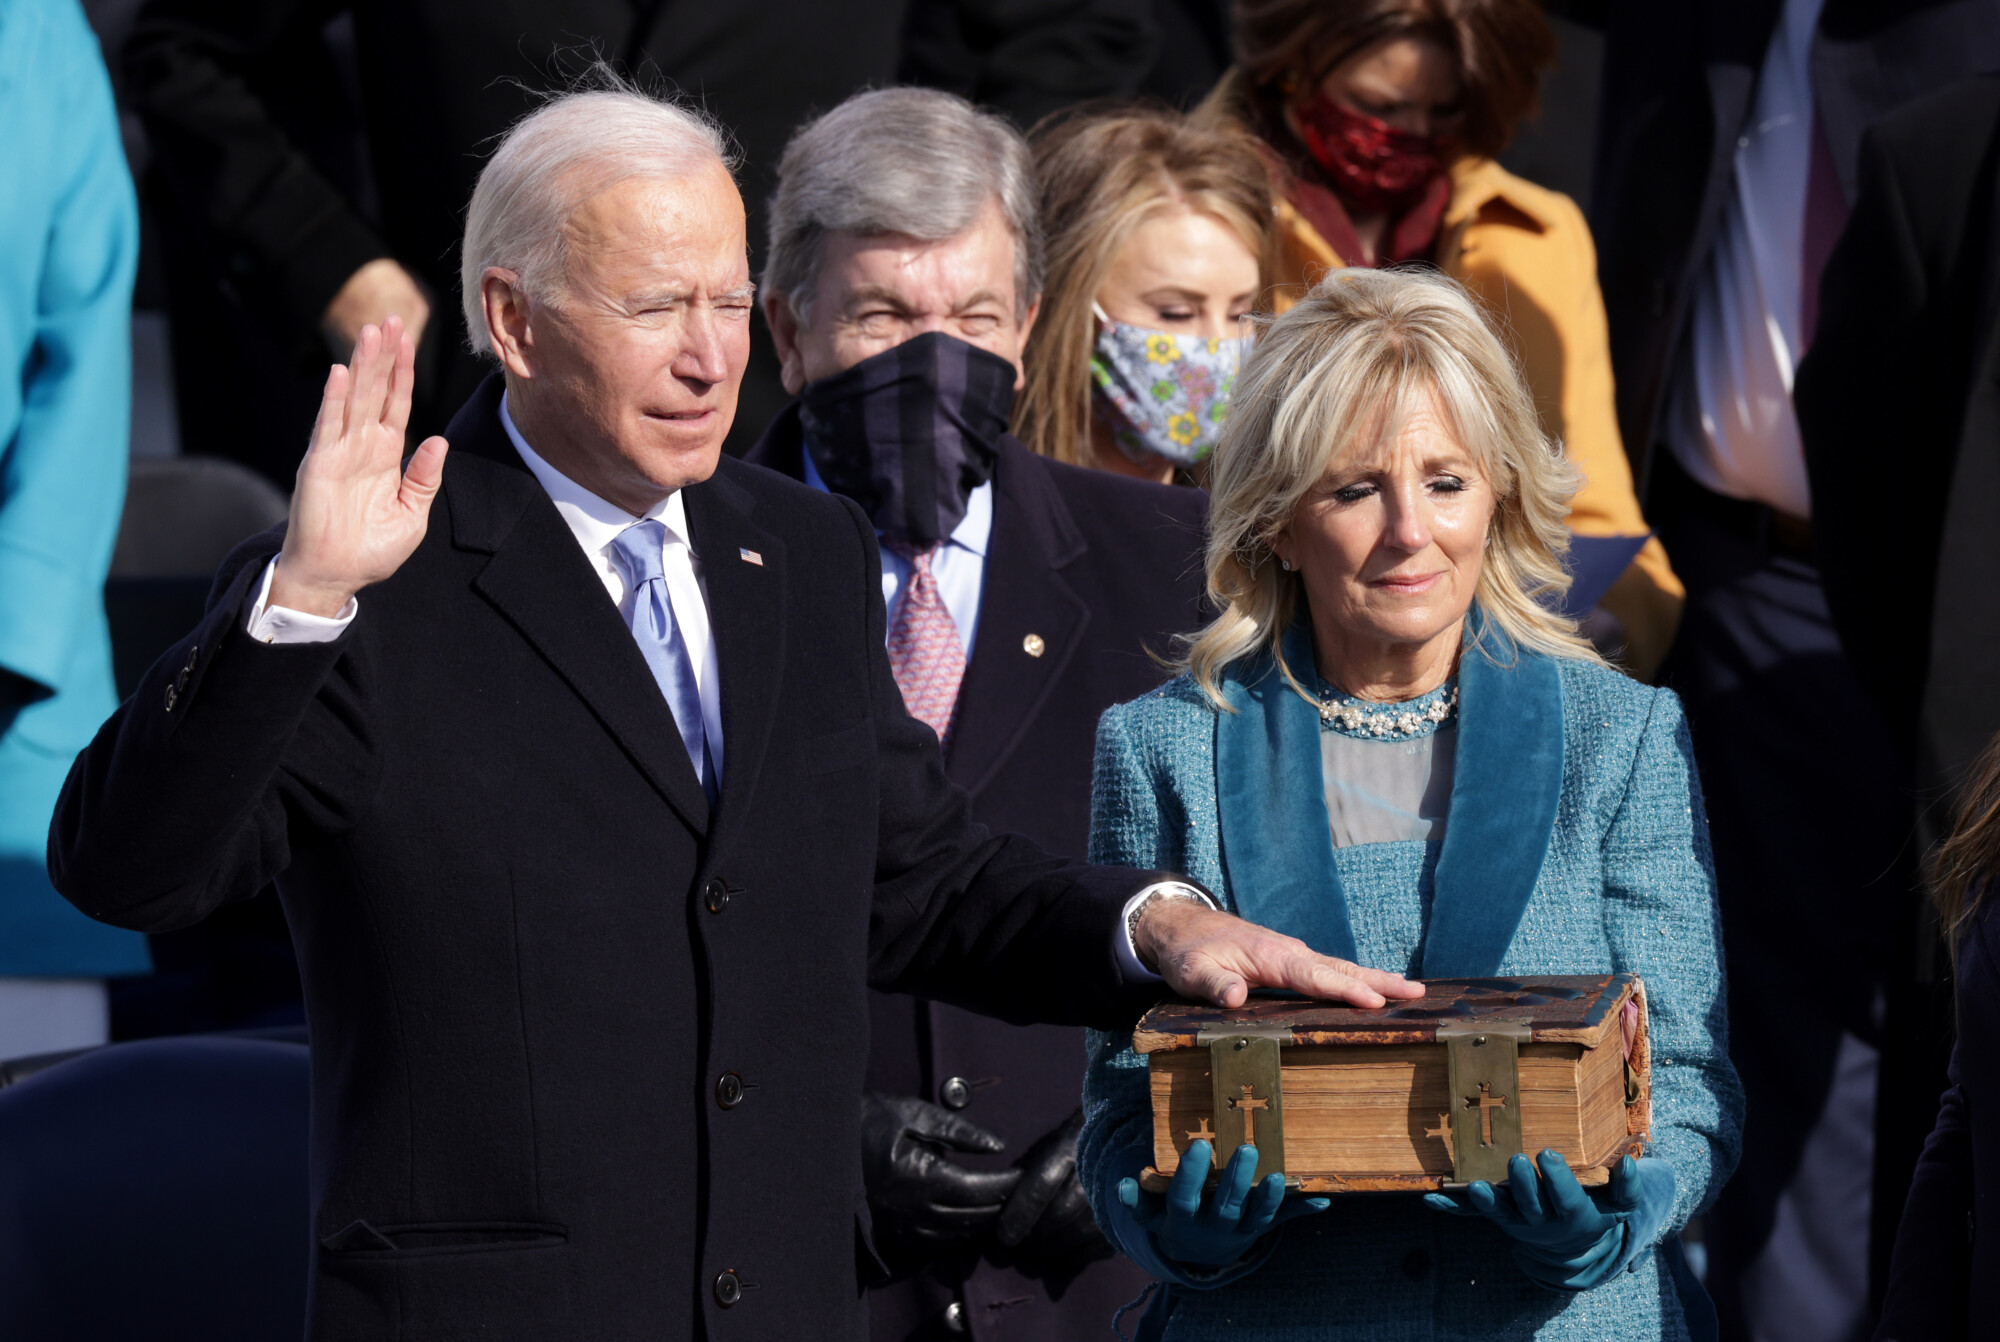 Biden Sworn In as 46th President of the United States